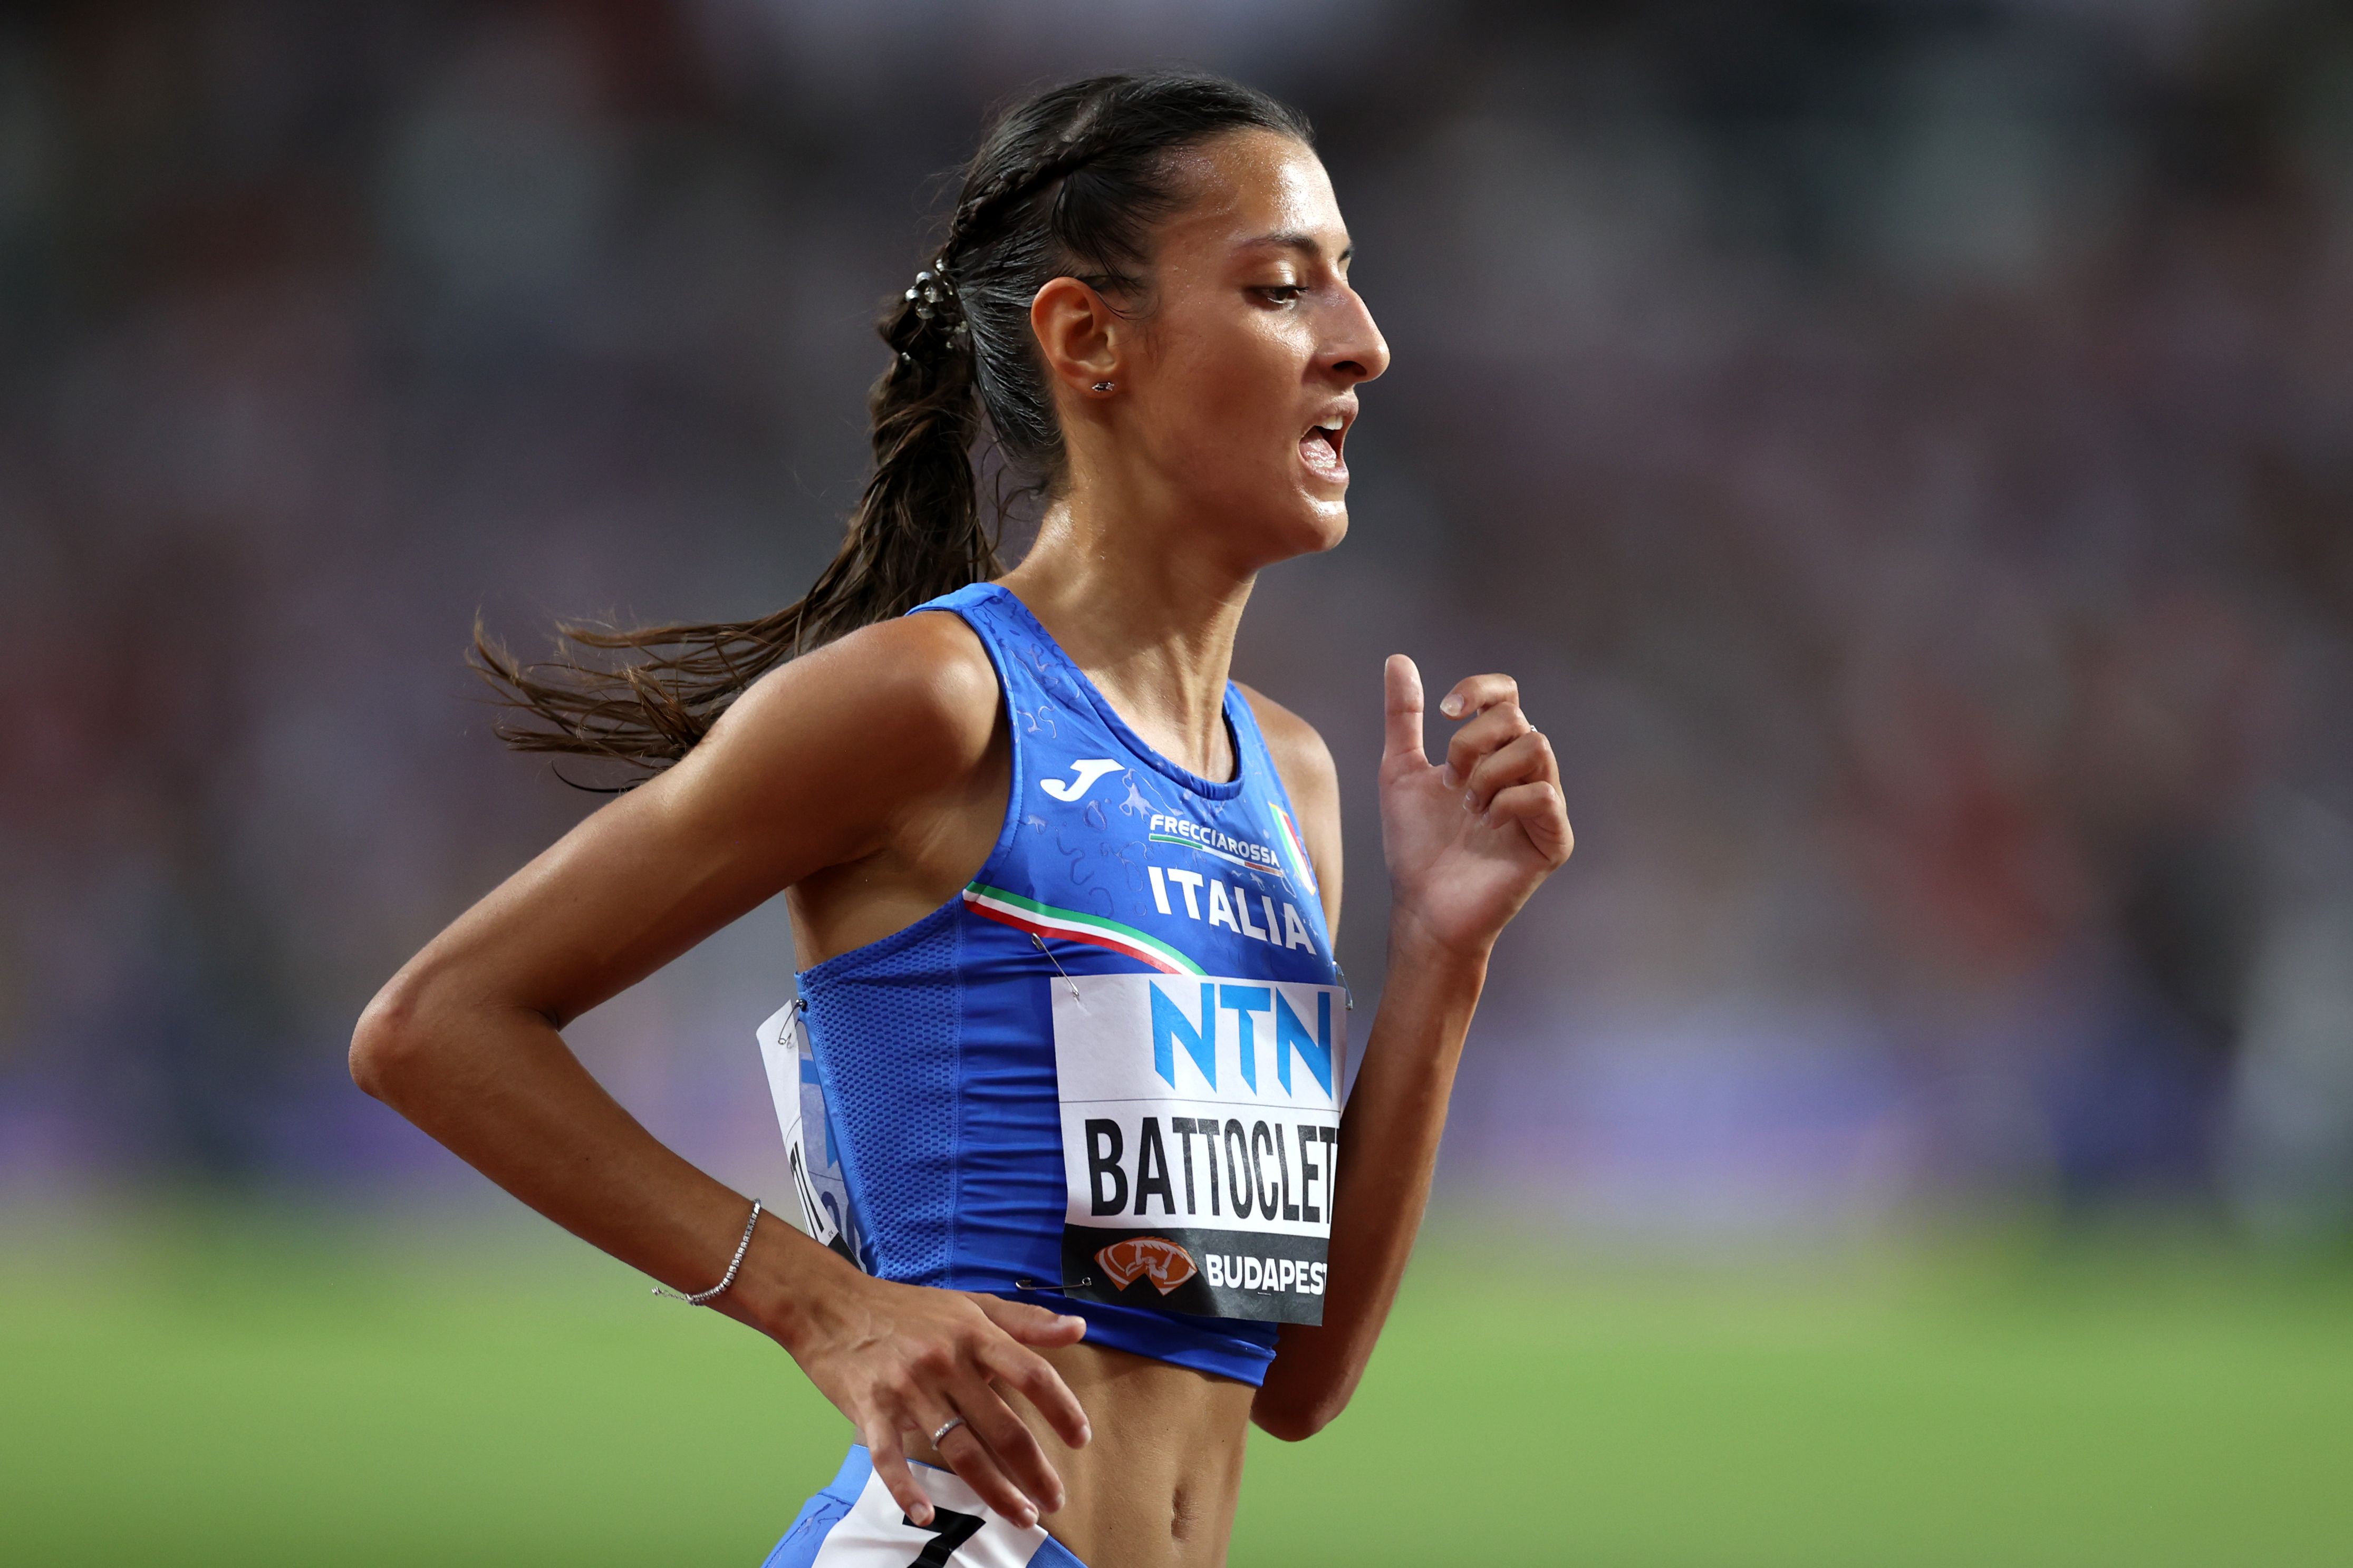 Nadia Battocletti in action at the World Athletics Championships Budapest 23